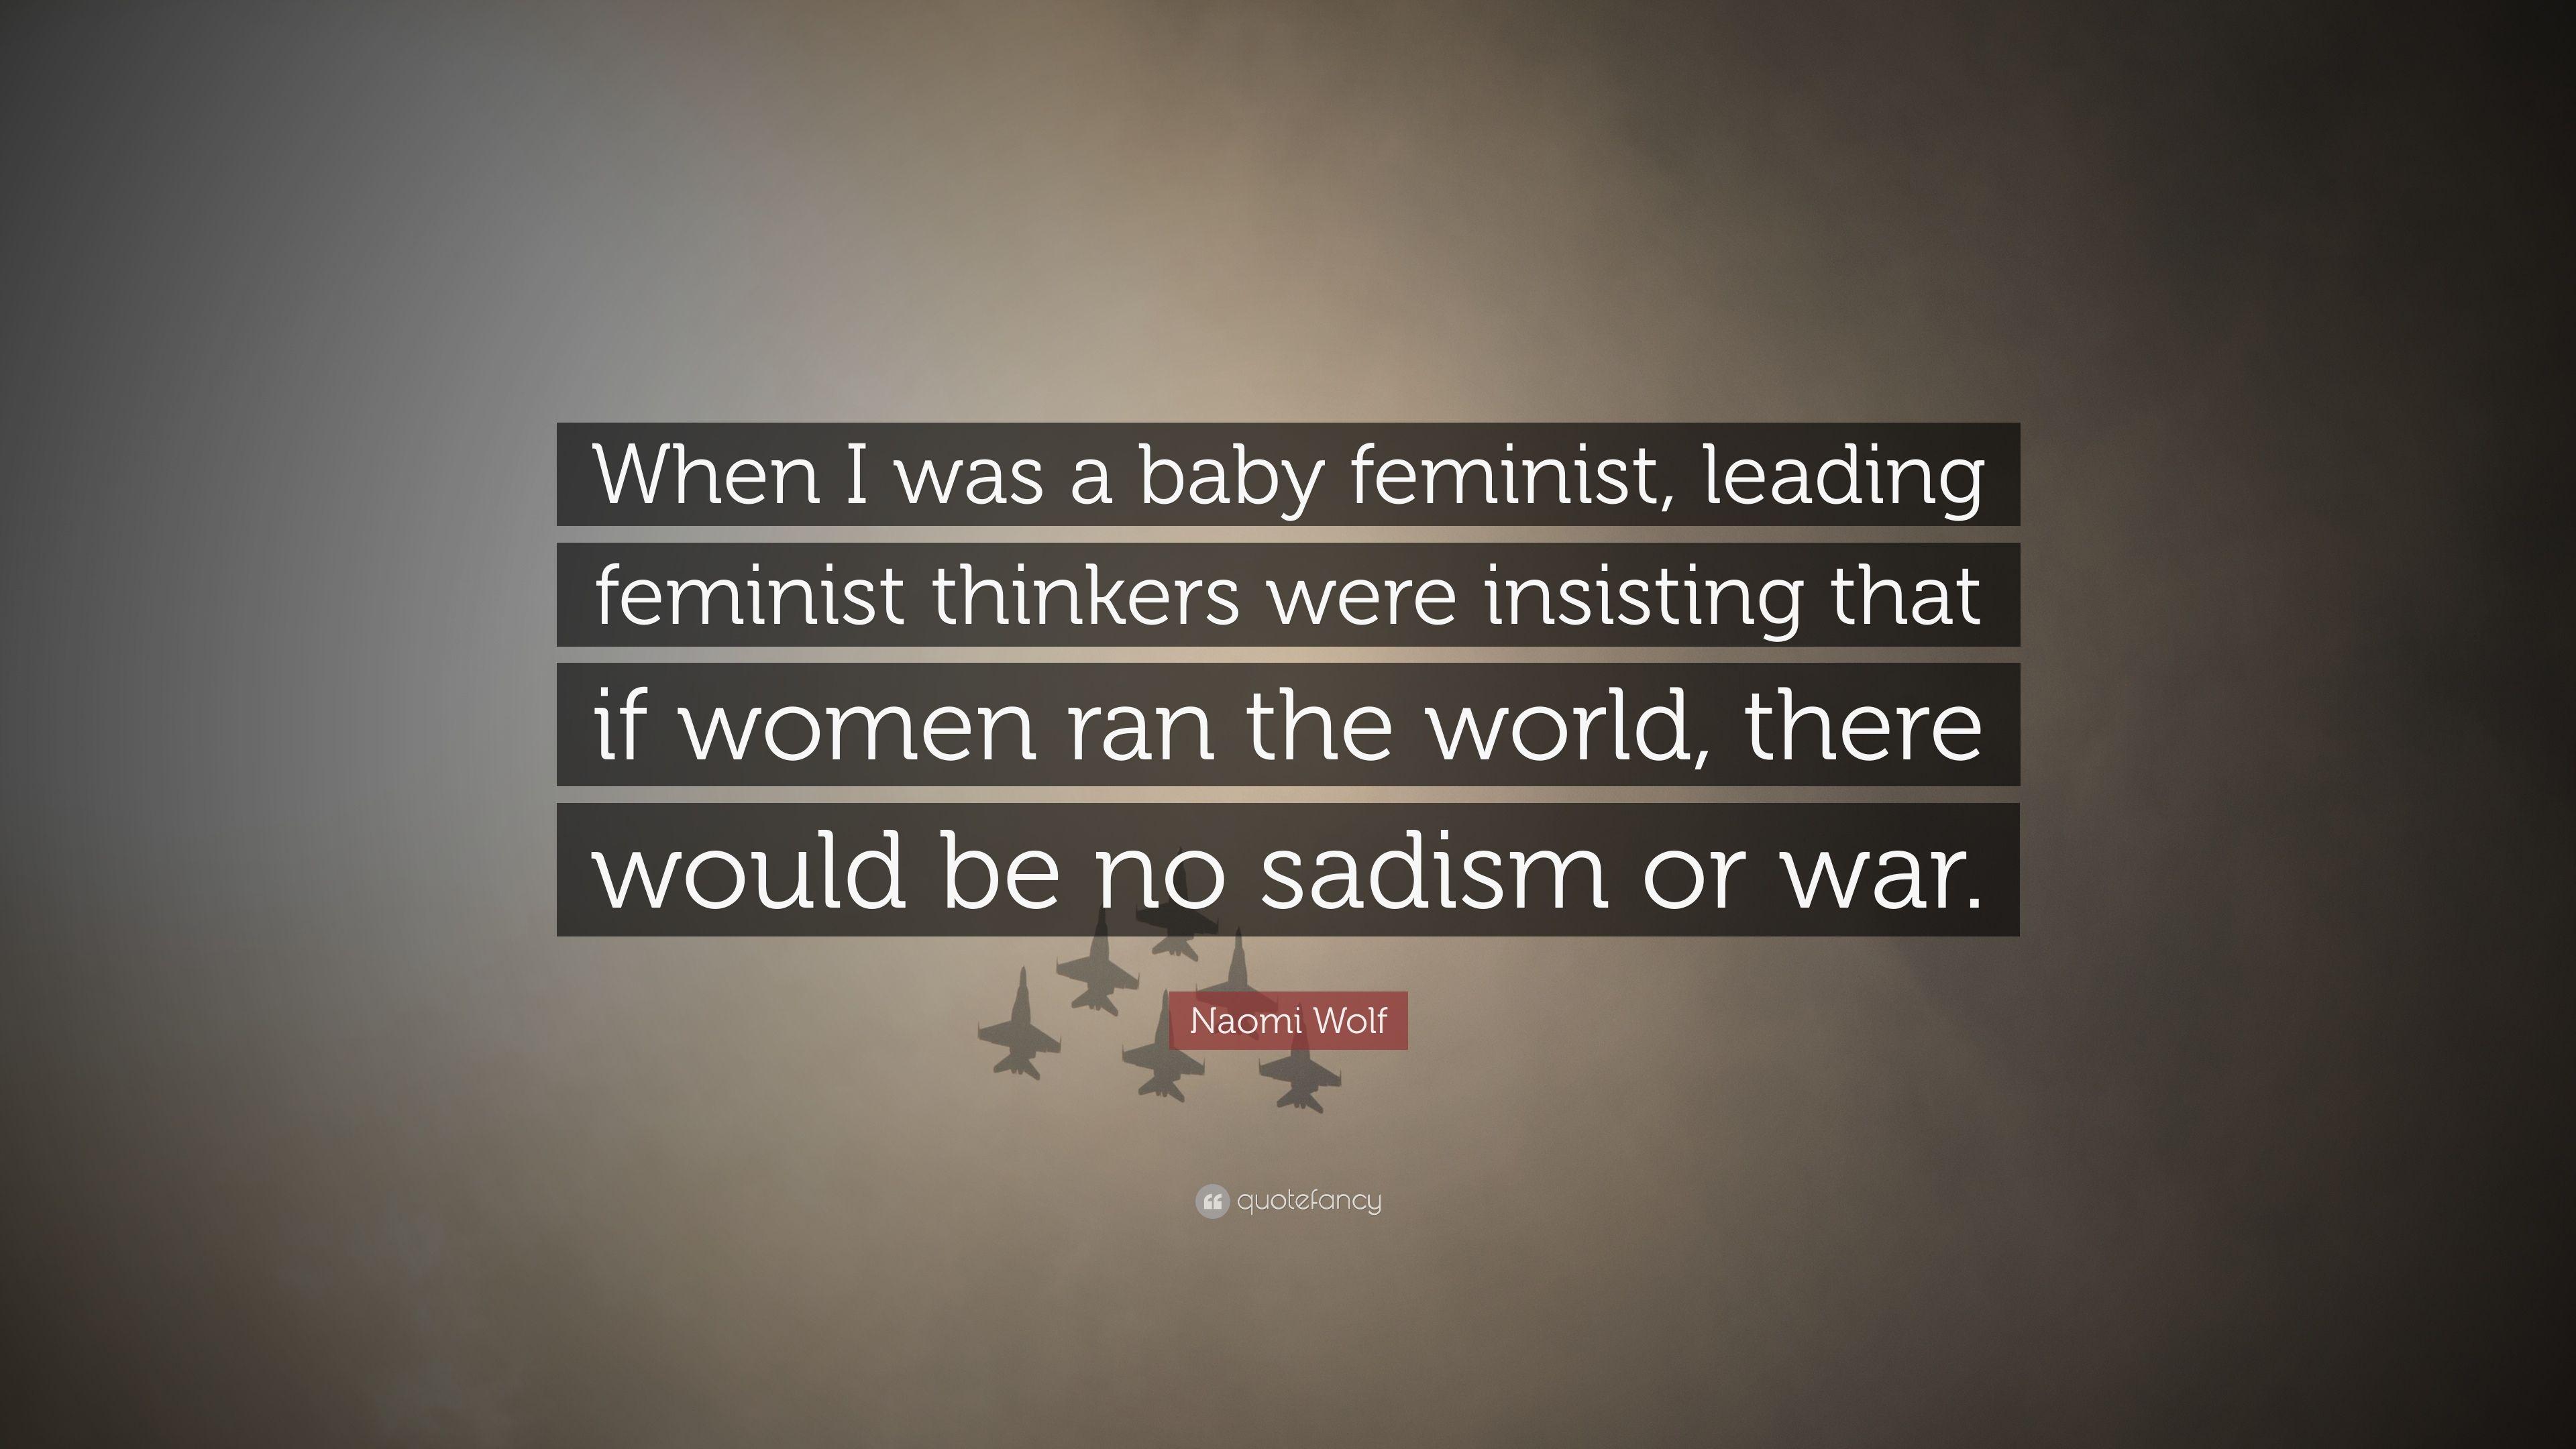 Naomi Wolf Quote: “When I was a baby feminist, leading feminist